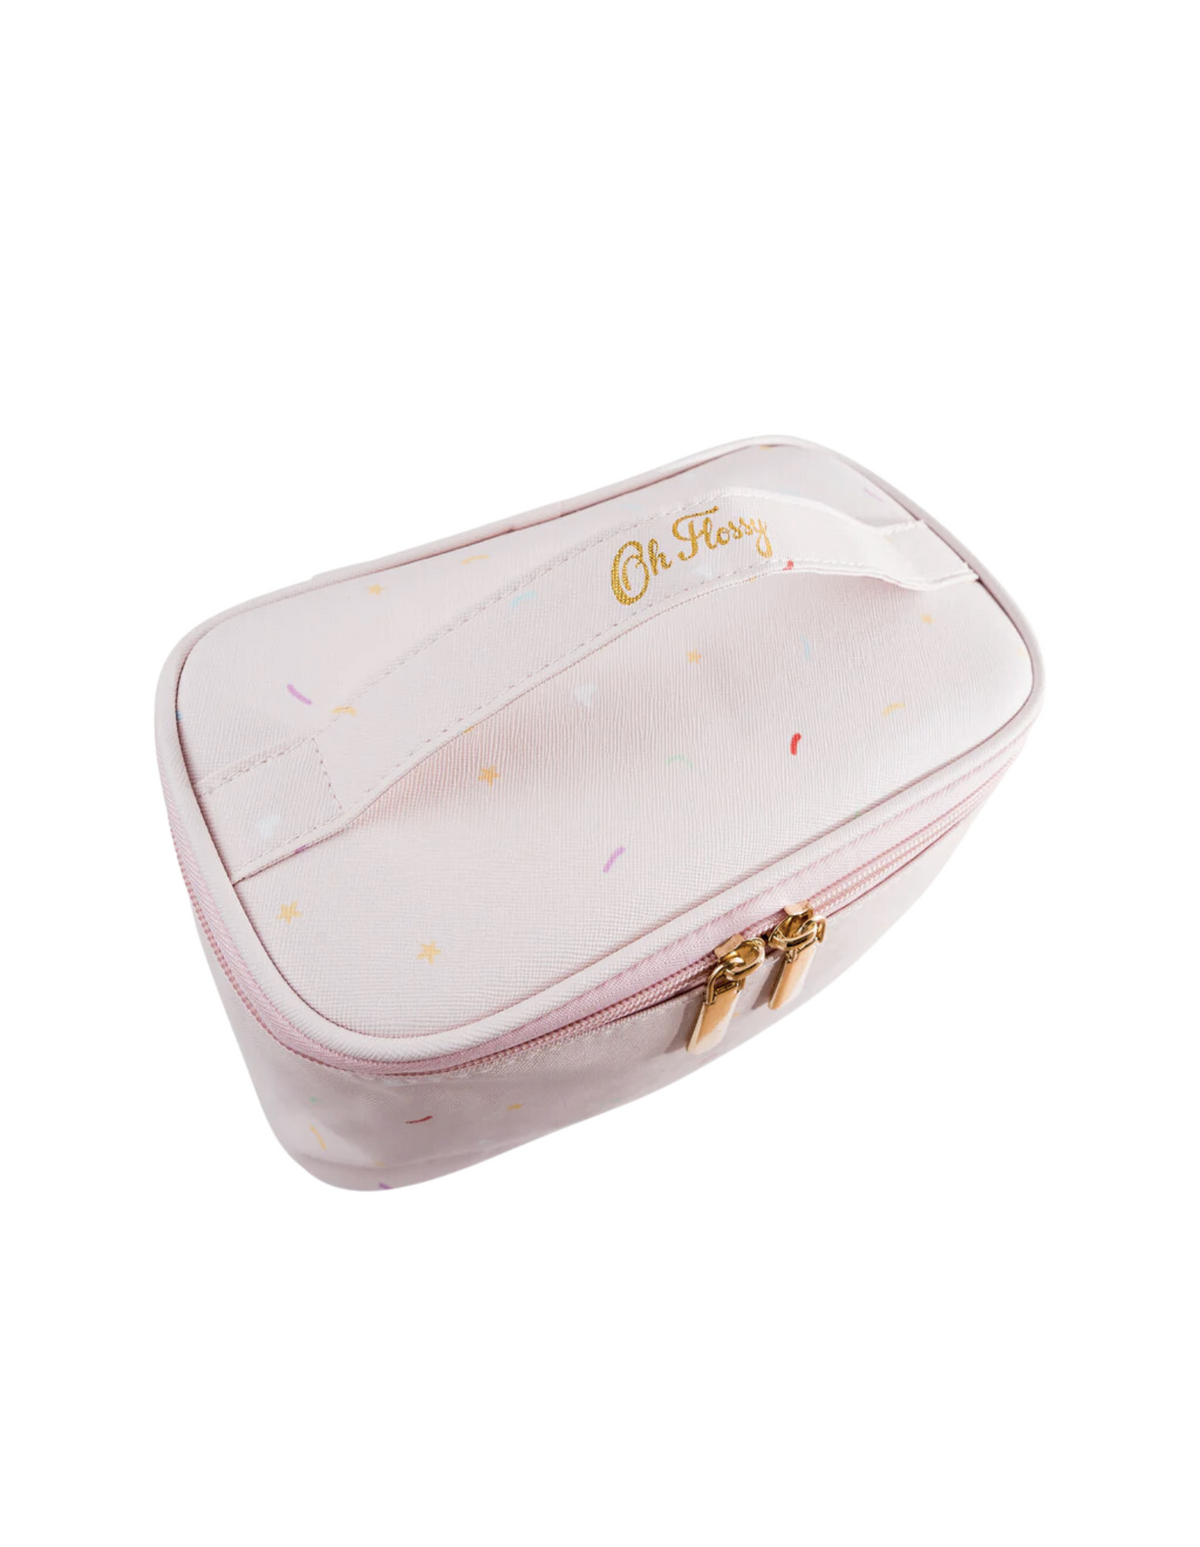 Cosmetic Case - Oh Flossy